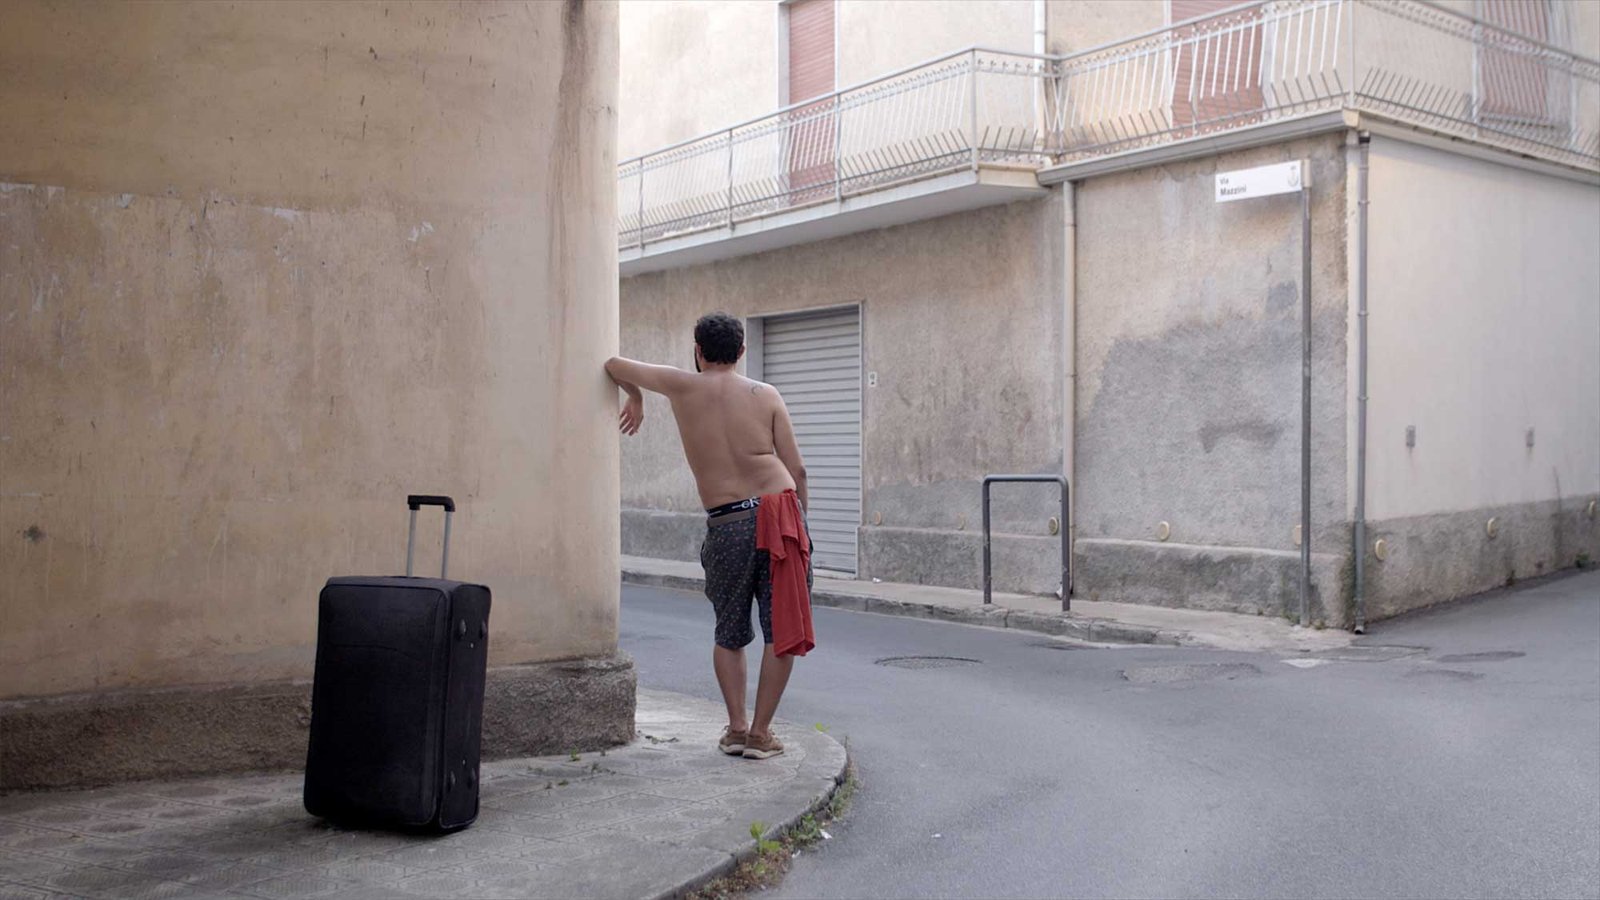 Italian Migration Documentary: Exploring ‘Should I Stay or Should I Go’ by Nils Clauss and Thomas Horat